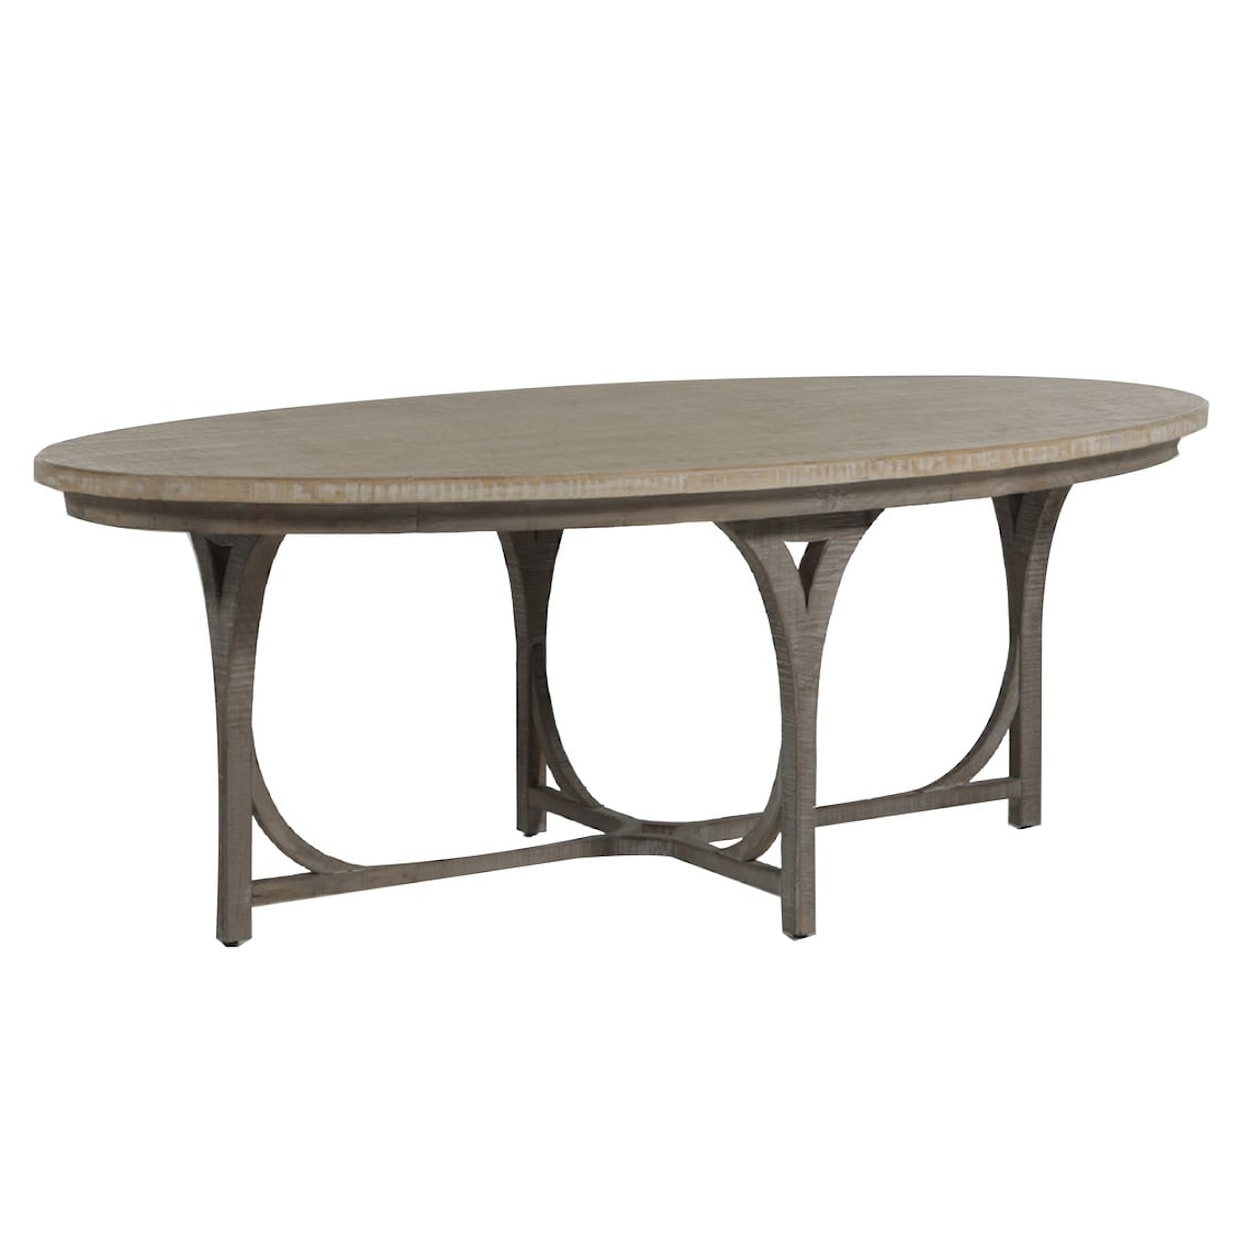 Gabby Dining Tables SHANNON oVAL dINING tABLE